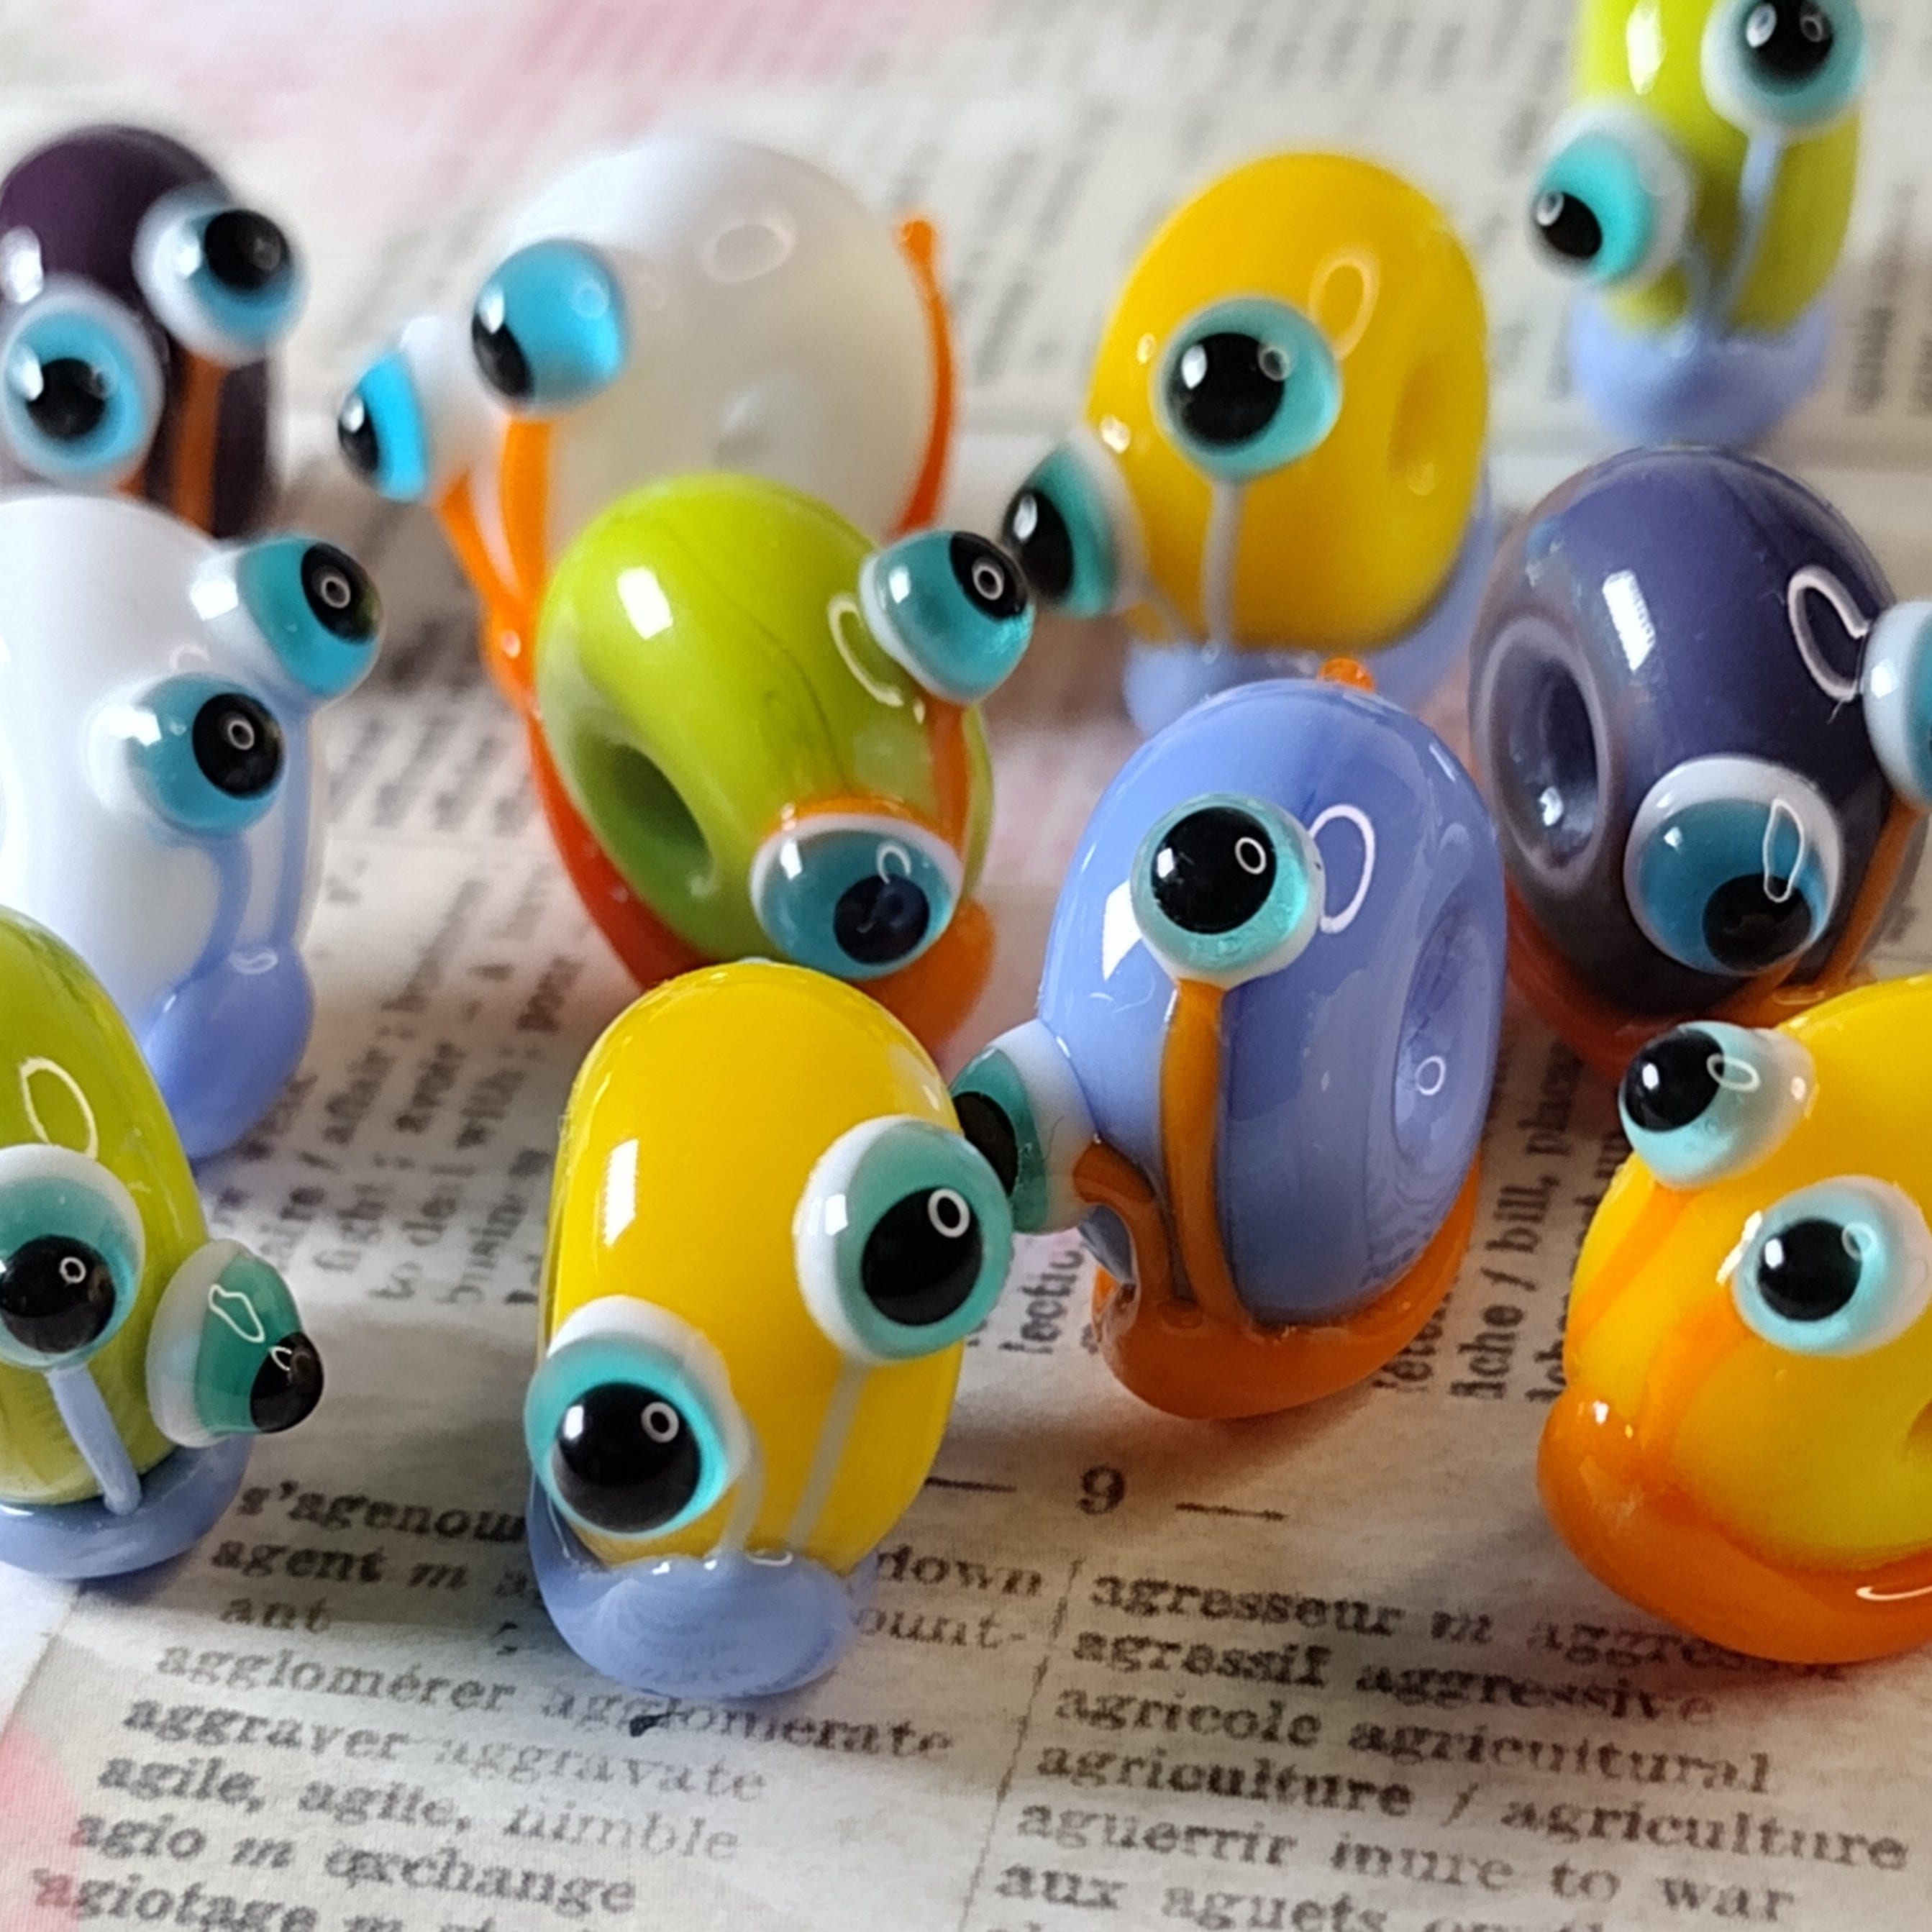 7mm Craft Eyes | Small Wiggle Eyes - 7mm - Paste-On - 20 Pieces/Pkg.  (nm40000912)